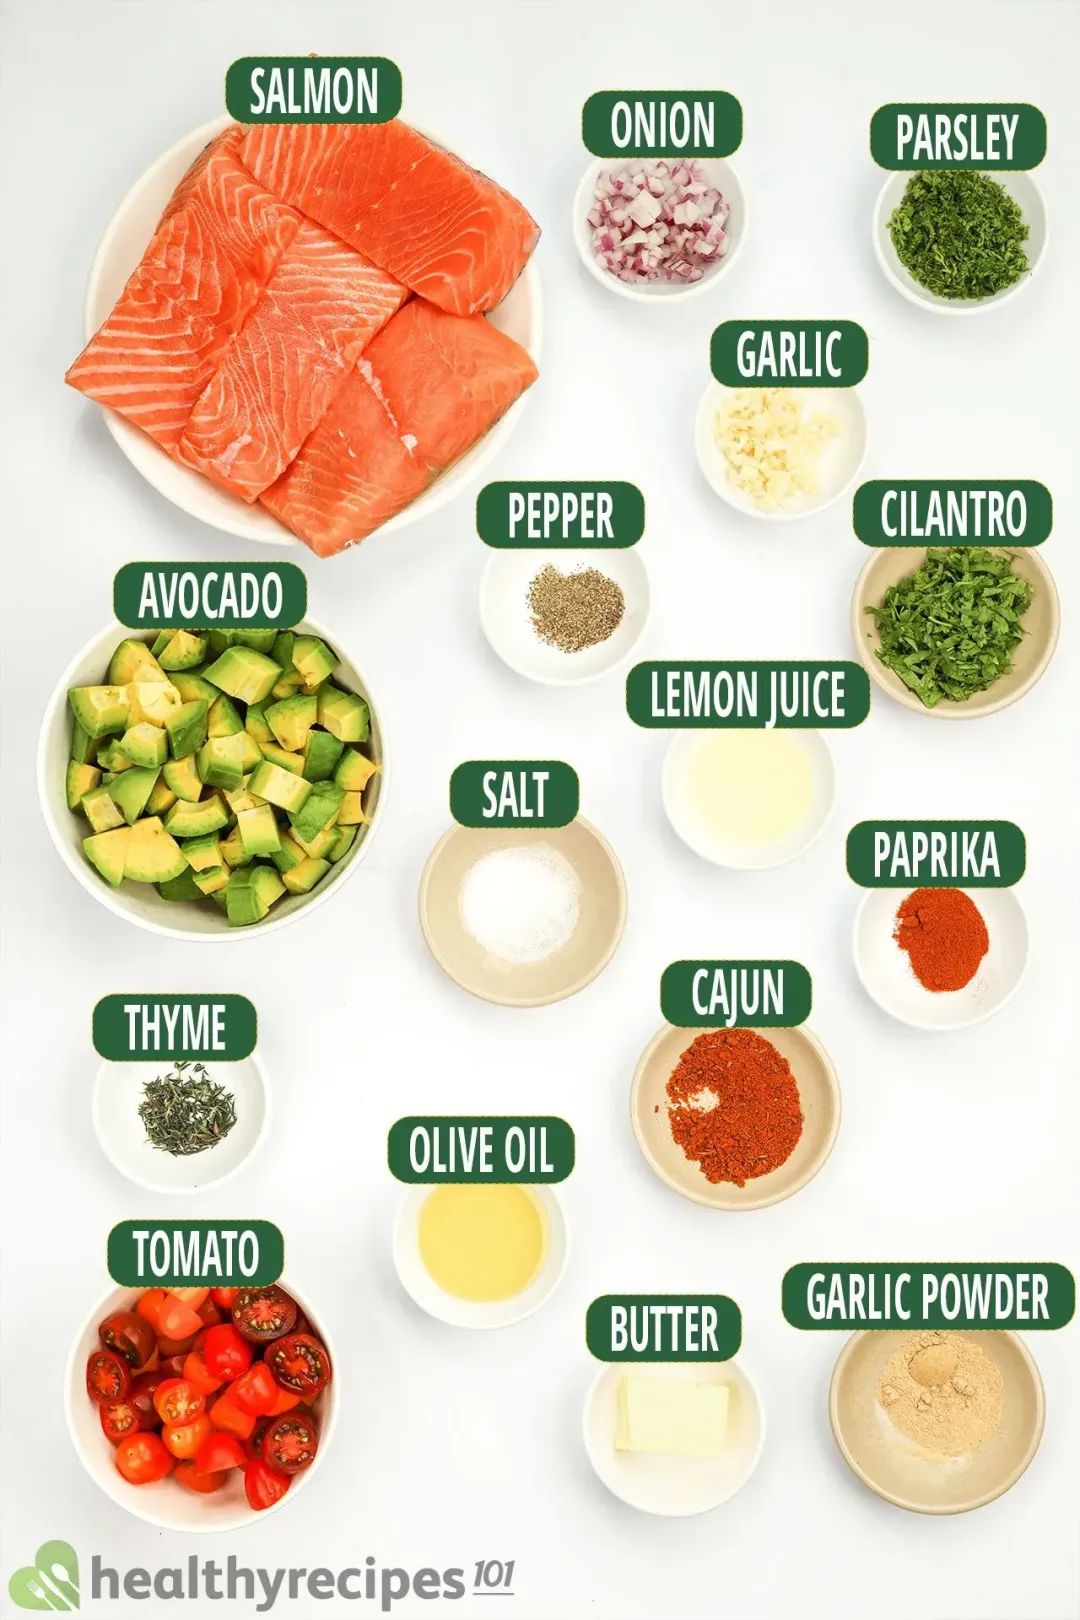 Ingredients for salmon avocado: salmon fillets, cubed avocados, halved cherry tomatoes, and other seasonings